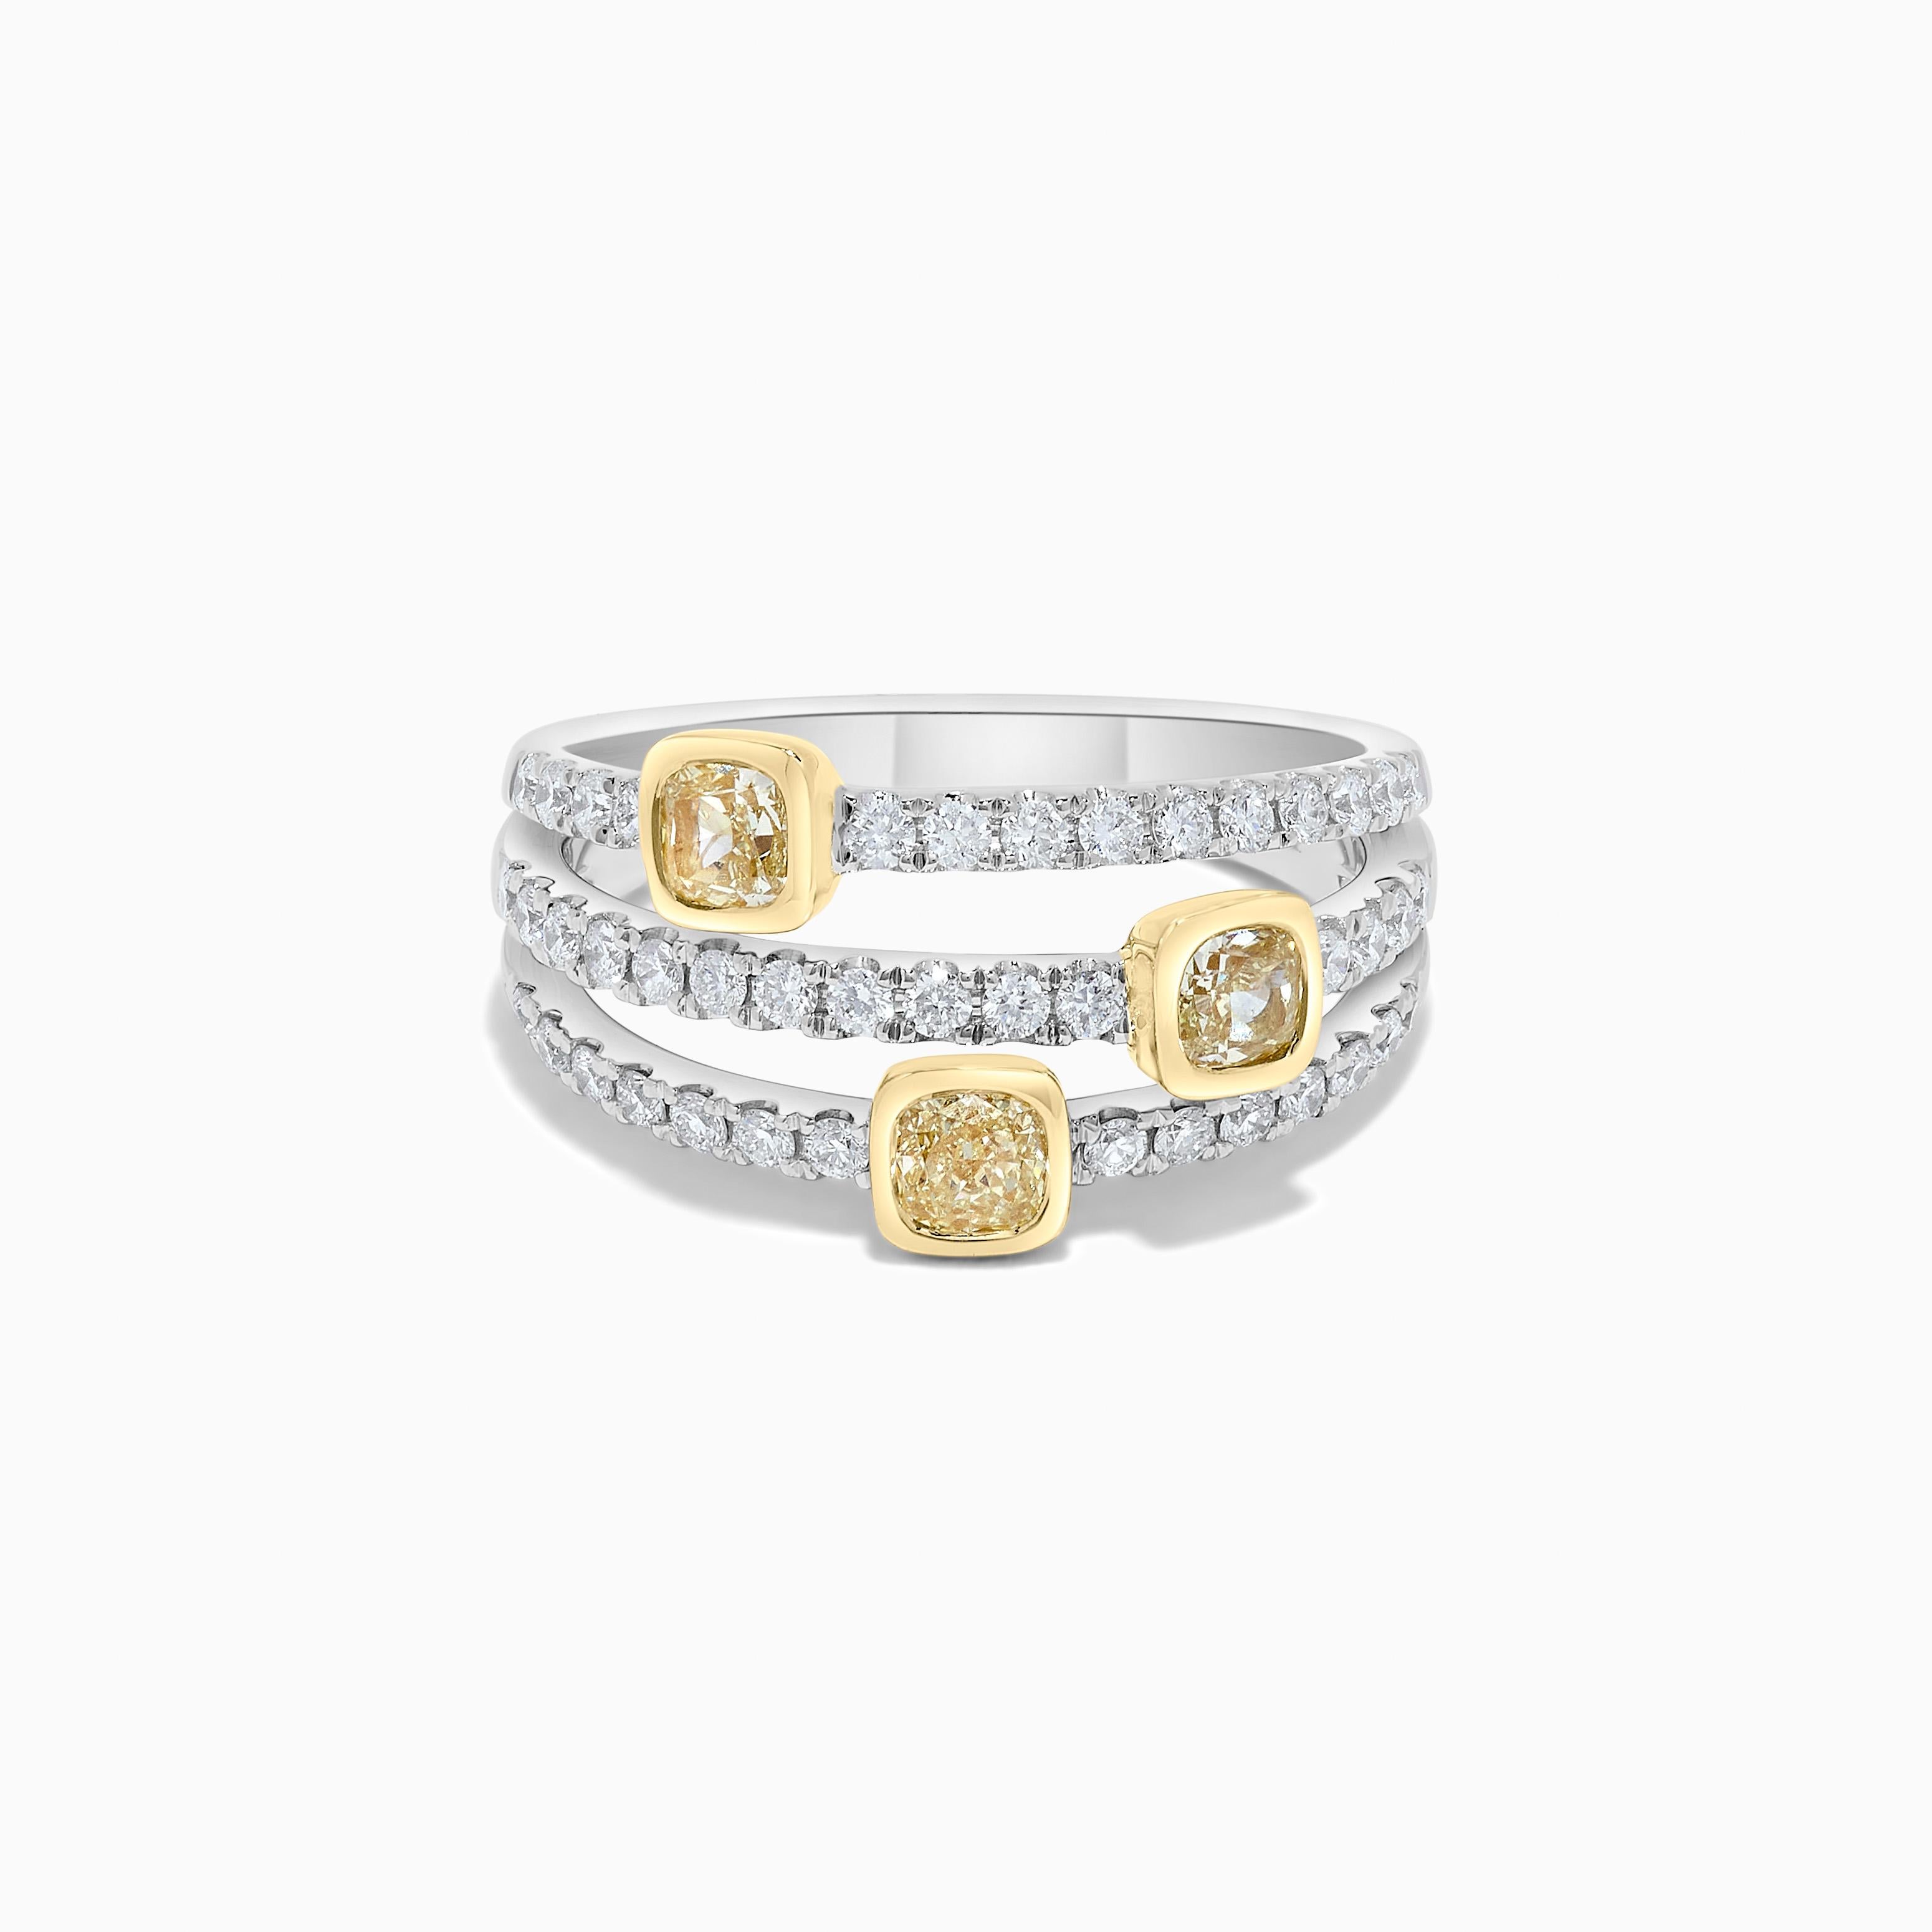 RareGemWorld's classic diamond band. Mounted in a beautiful 18K Yellow and White Gold setting with natural cushion cut yellow diamonds complimented by natural round cut white diamonds. This band is guaranteed to impress and enhance your personal